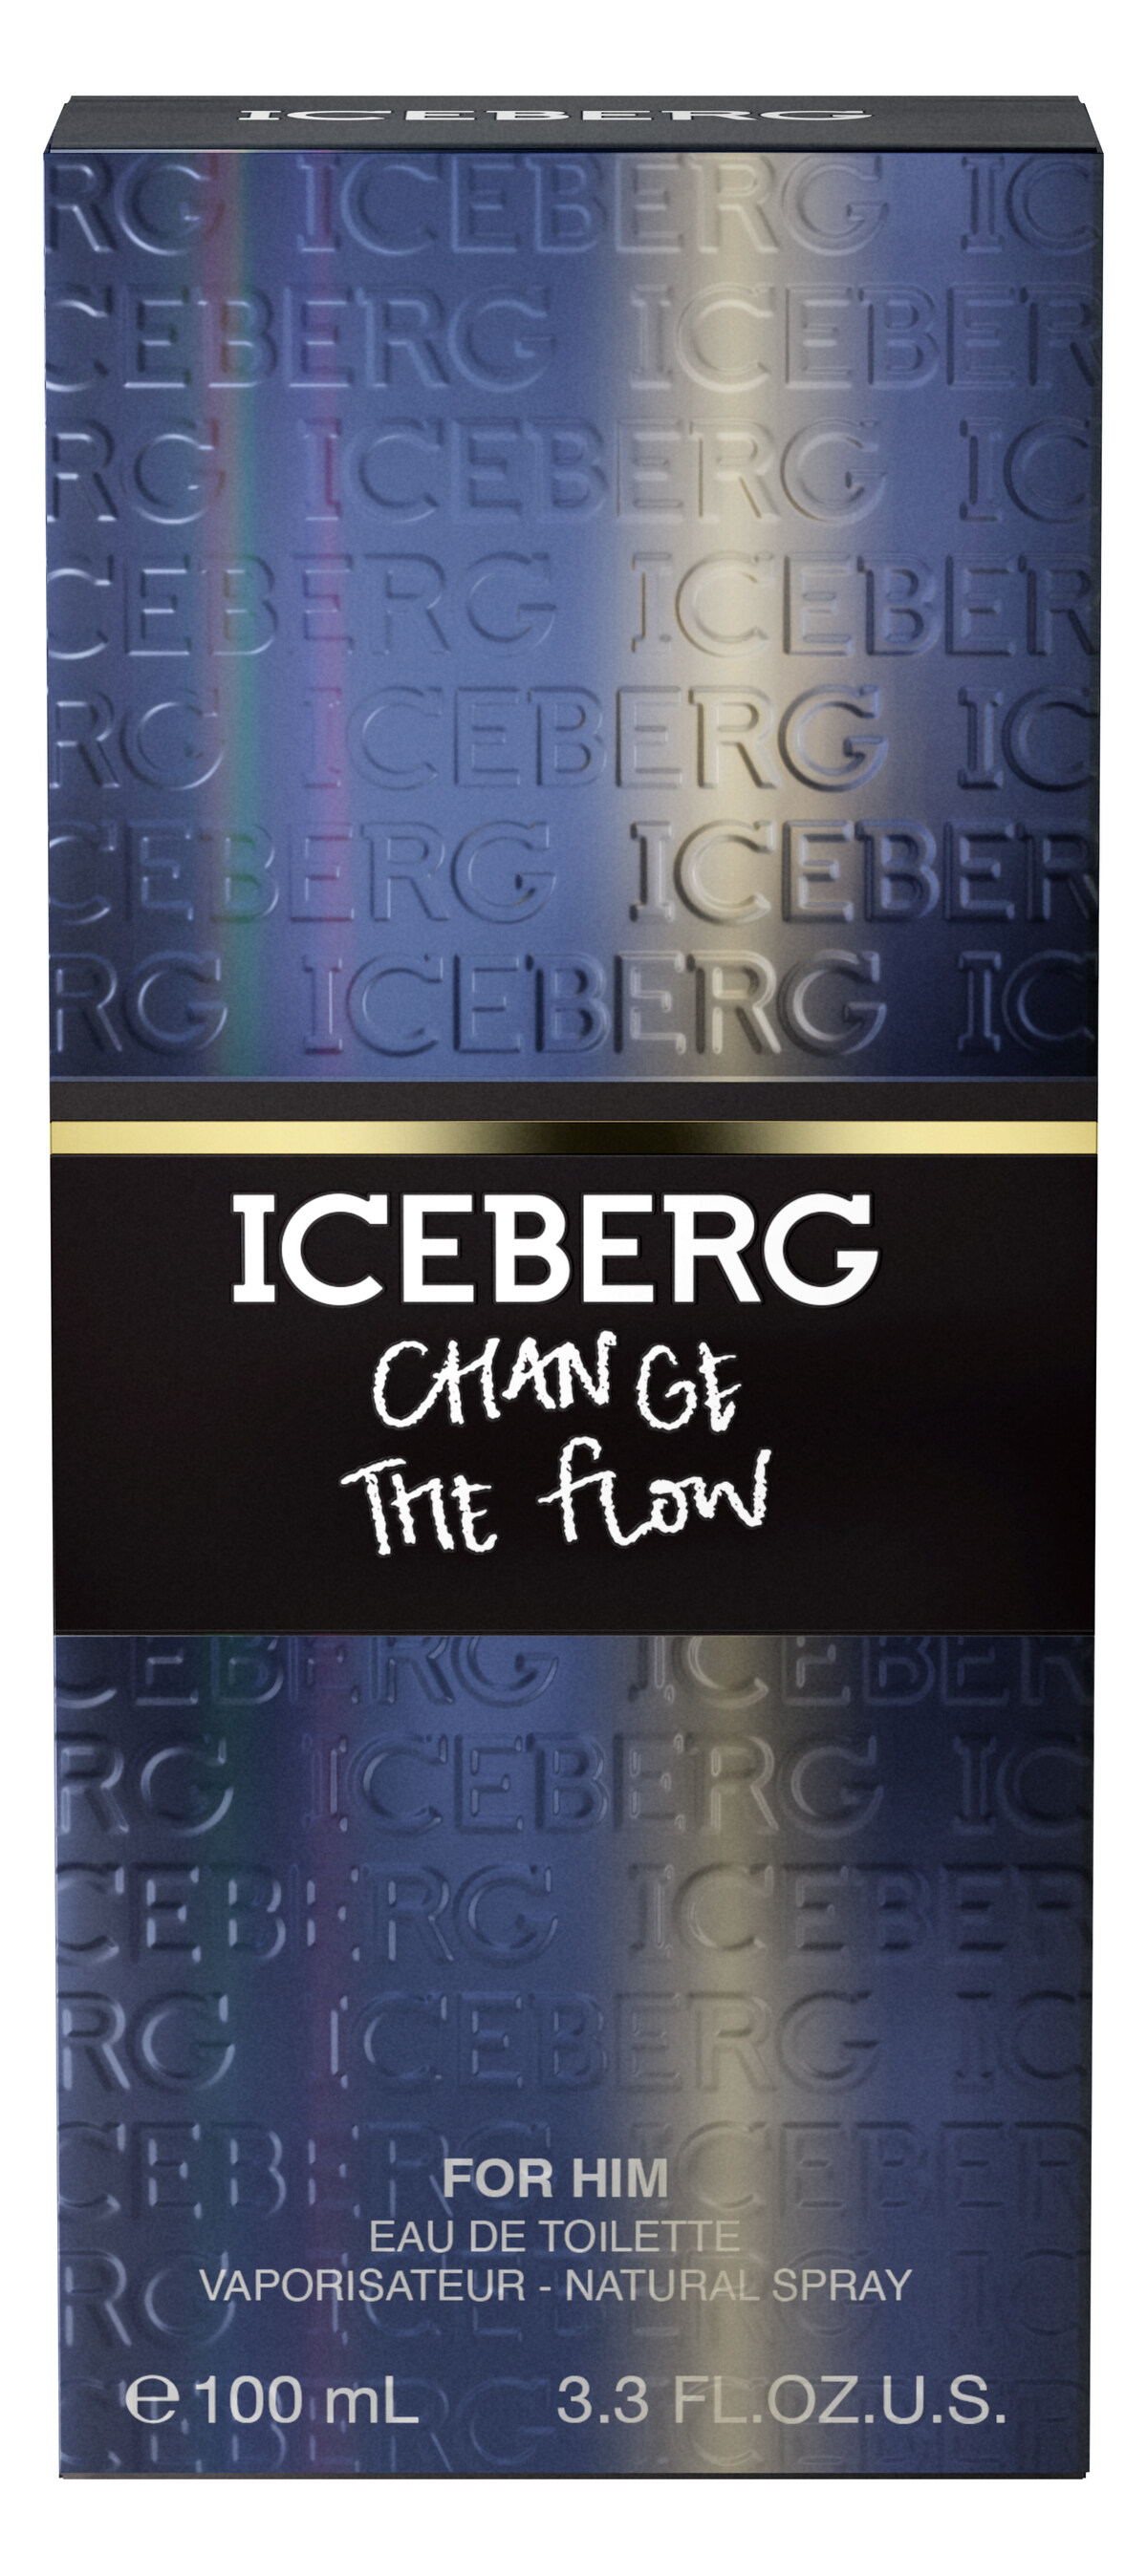 Change The Flow by Iceberg » Reviews & Perfume Facts